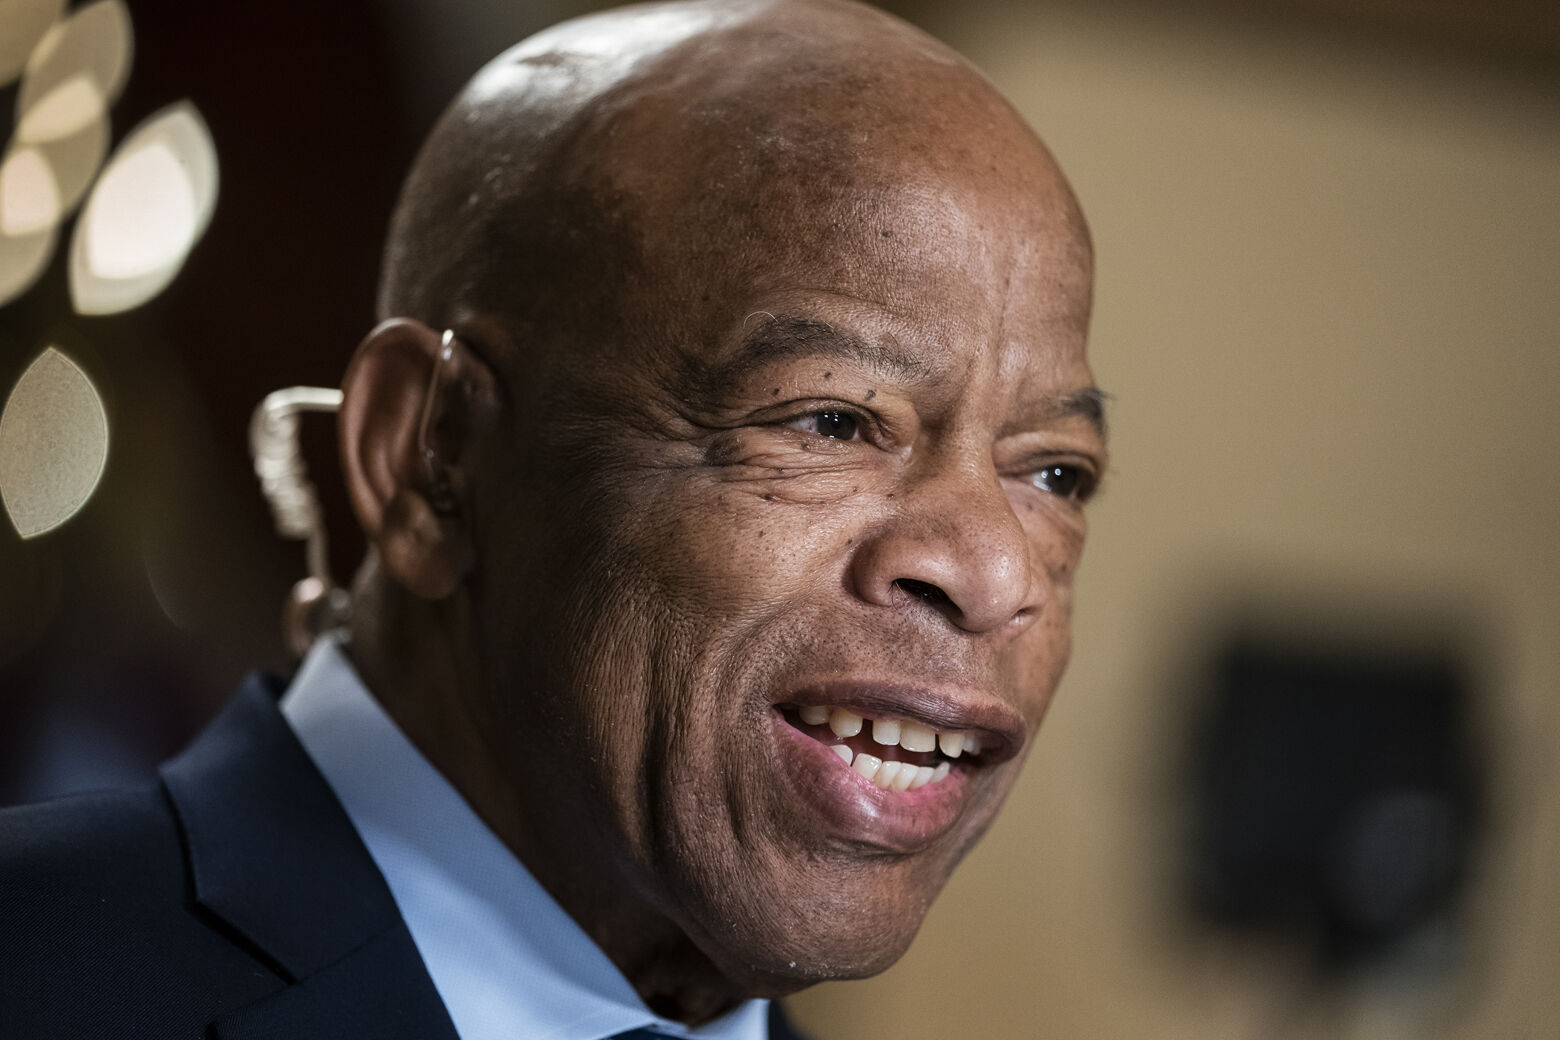 FILE - In this July 16, 2019, file photo, Rep. John Lewis, D-Ga., speaks during a television interview at the Capitol in Washington. Lewisâ€&#x2122; endorsement of Democratic Senate hopeful Jon Ossoff is the focus of a new television ad from Ossoffâ€&#x2122;s campaign that begins airing statewide on Tuesday. (AP Photo/J. Scott Applewhite, File)